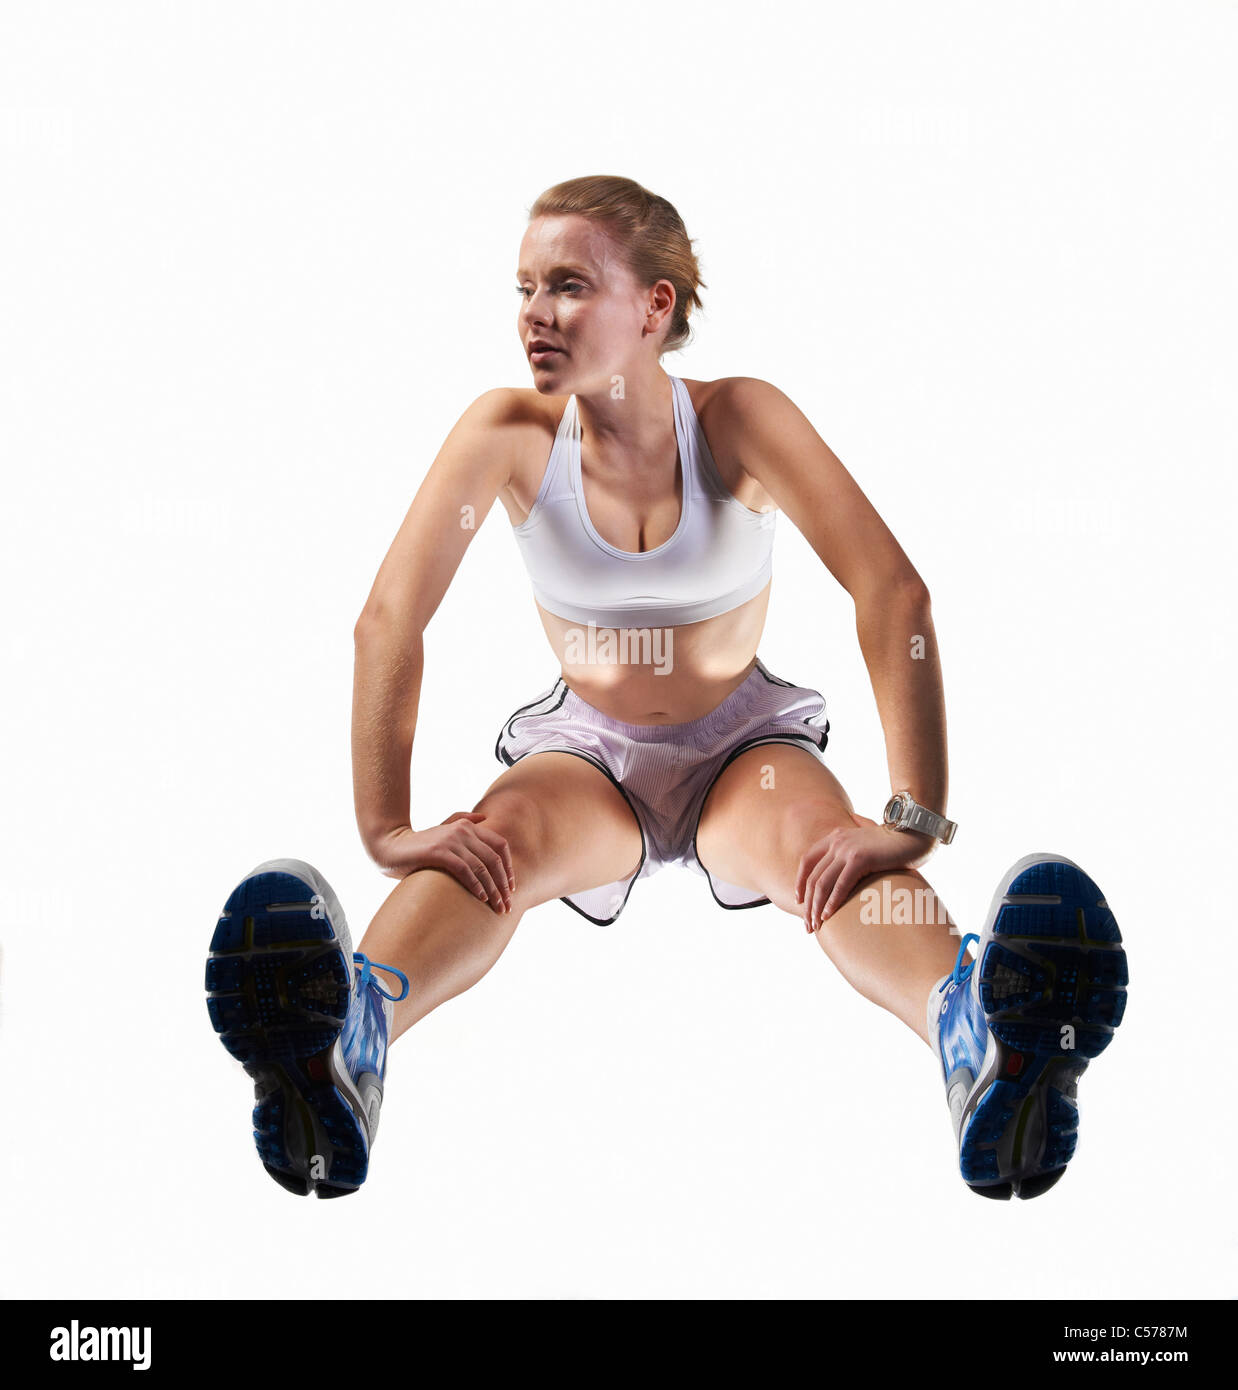 Low angle view of woman stretching Stock Photo